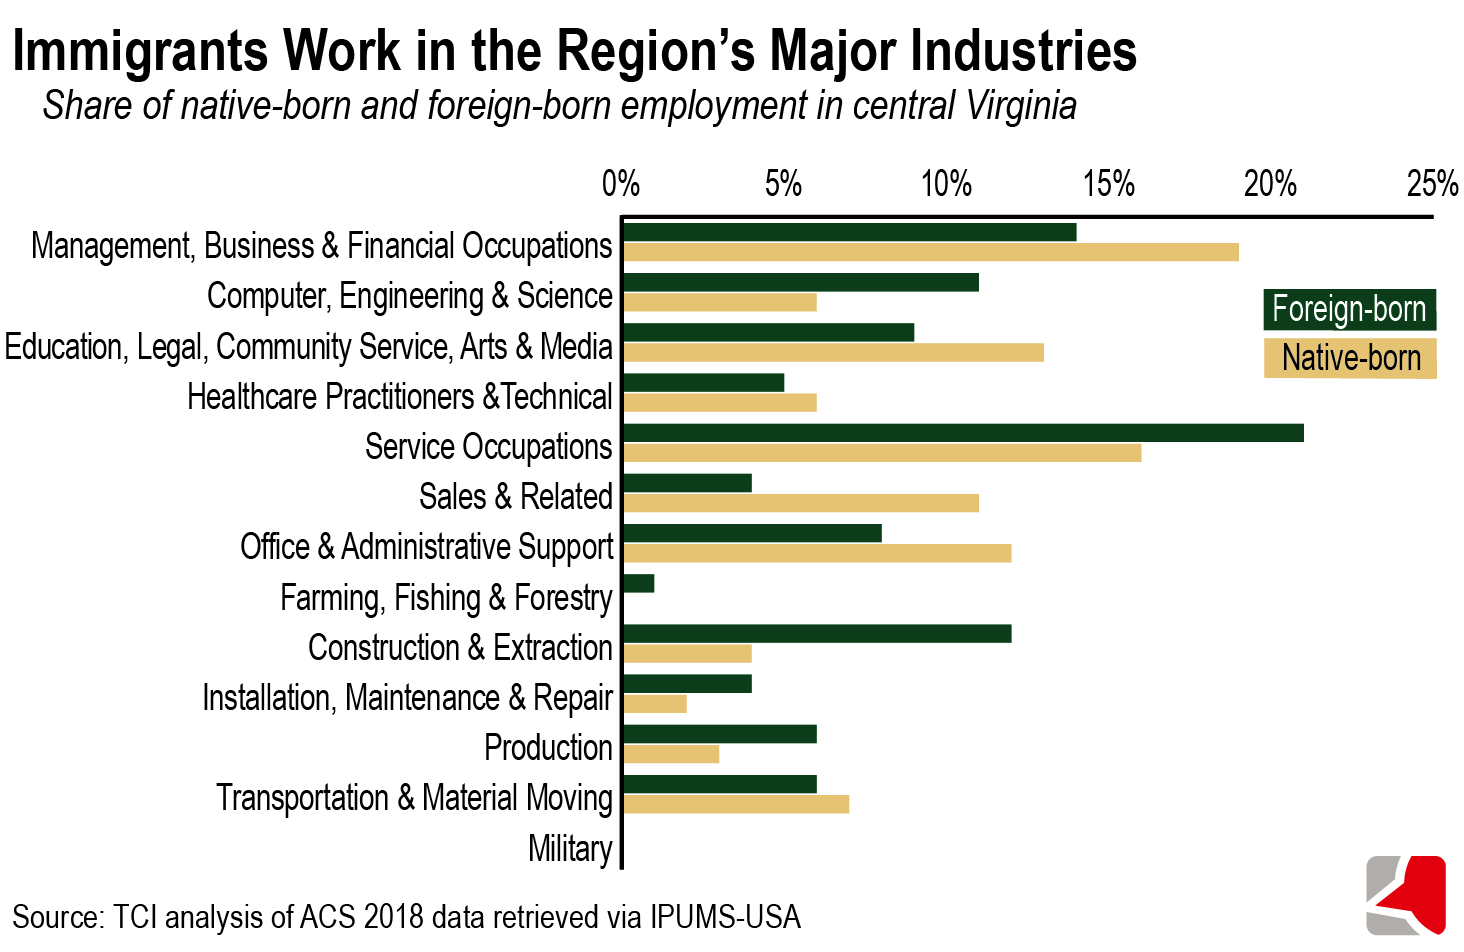 Bar growing showing the share of native-born and foreign-born employment by sector in central Virginia. Following service occupations at just over 20%, 14% of foreign-born immigrants work in management, business, and financial occupations, 12% in construction and 11% in computer, engineering, and science occupations, based on analysis of ACS 2018 data via IPUMS-USA